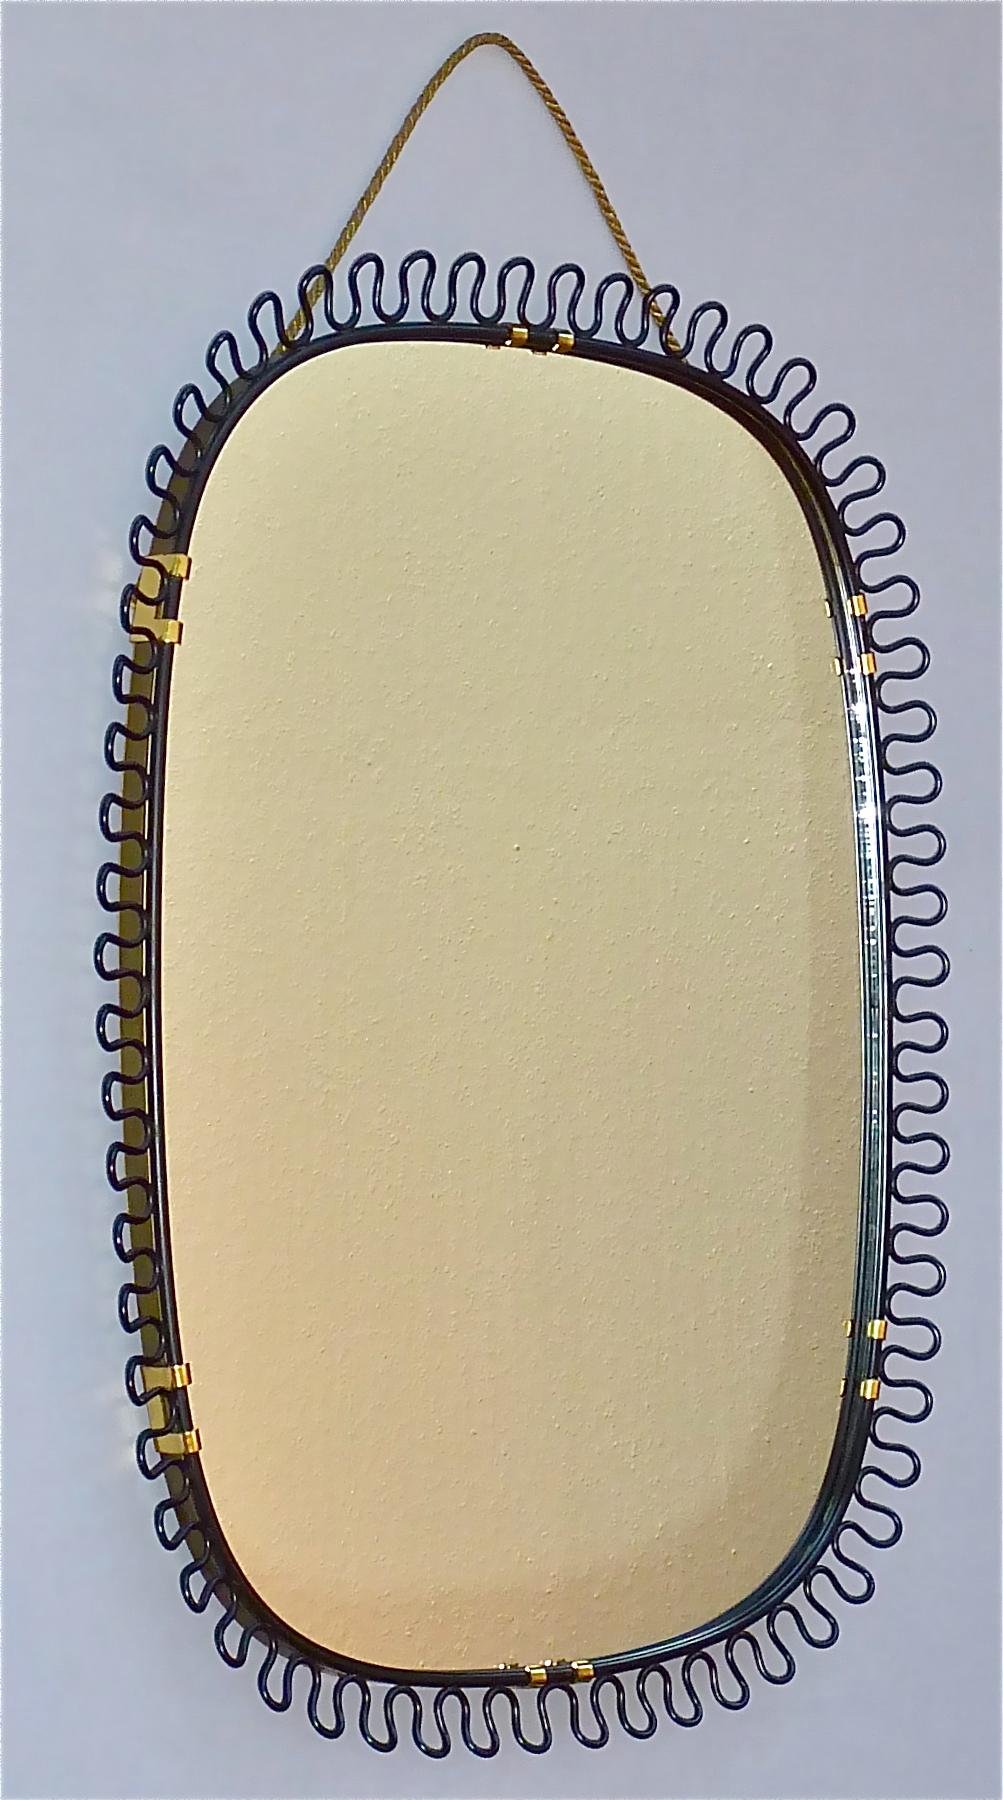 Sculptural and elegant midcentury wall mirror by Josef Frank Austria or Sweden for Svenskt Tenn, circa 1950s which is made of patinated brass metal, a beautiful black enameled loop-wire-decoration, original mirror glass, wood on reverse and with its